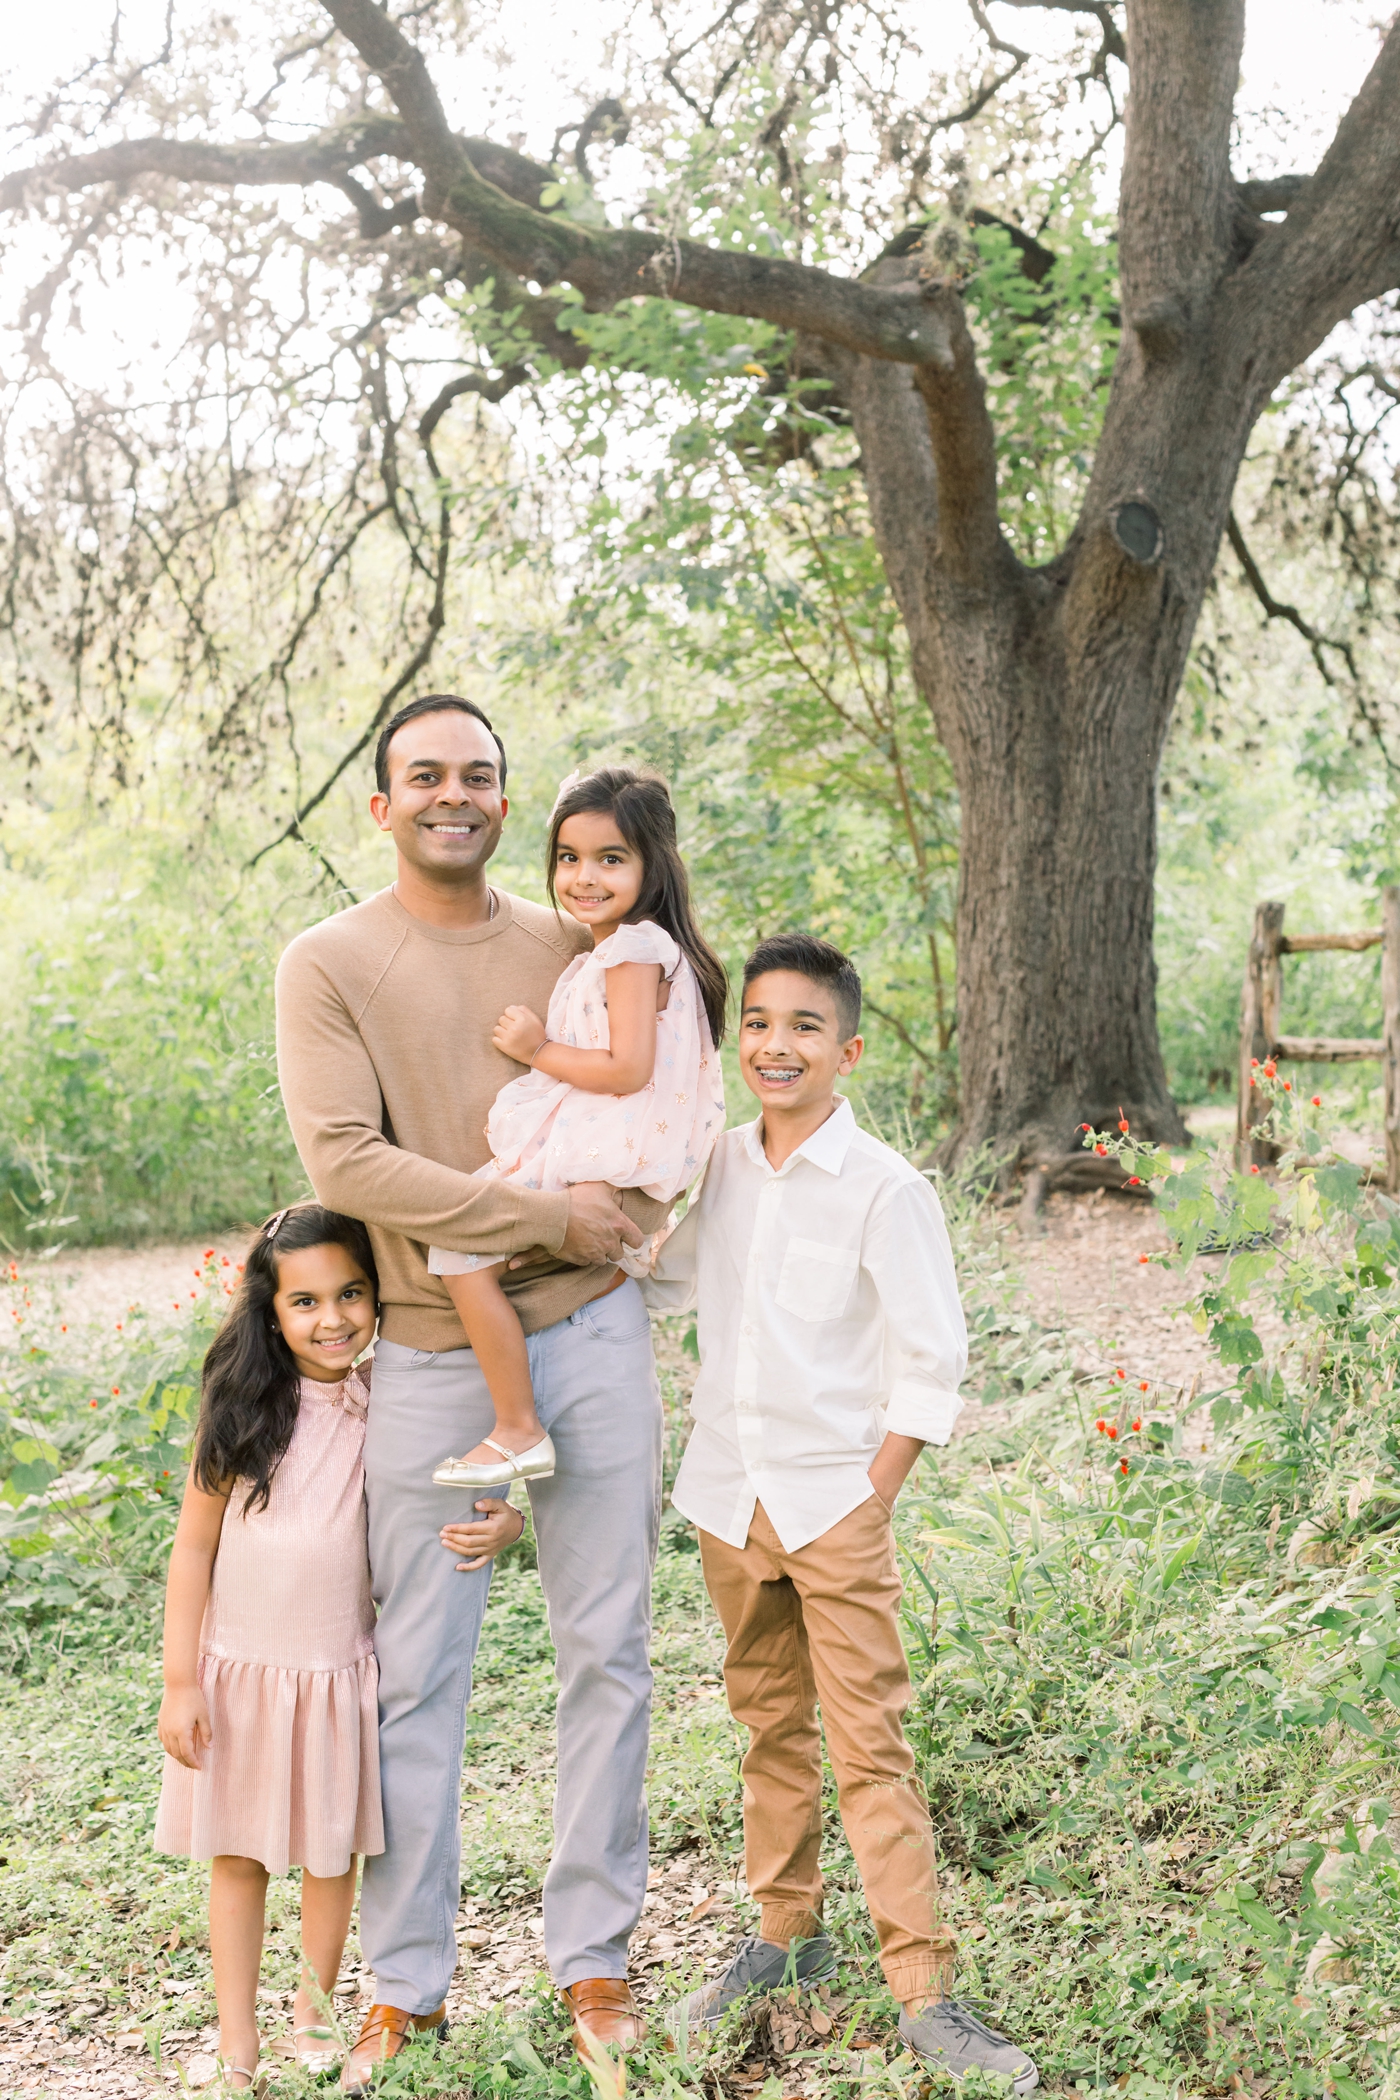 Dad with three children under oak trees in Austin, TX. Photo by Sana Ahmed Photography.